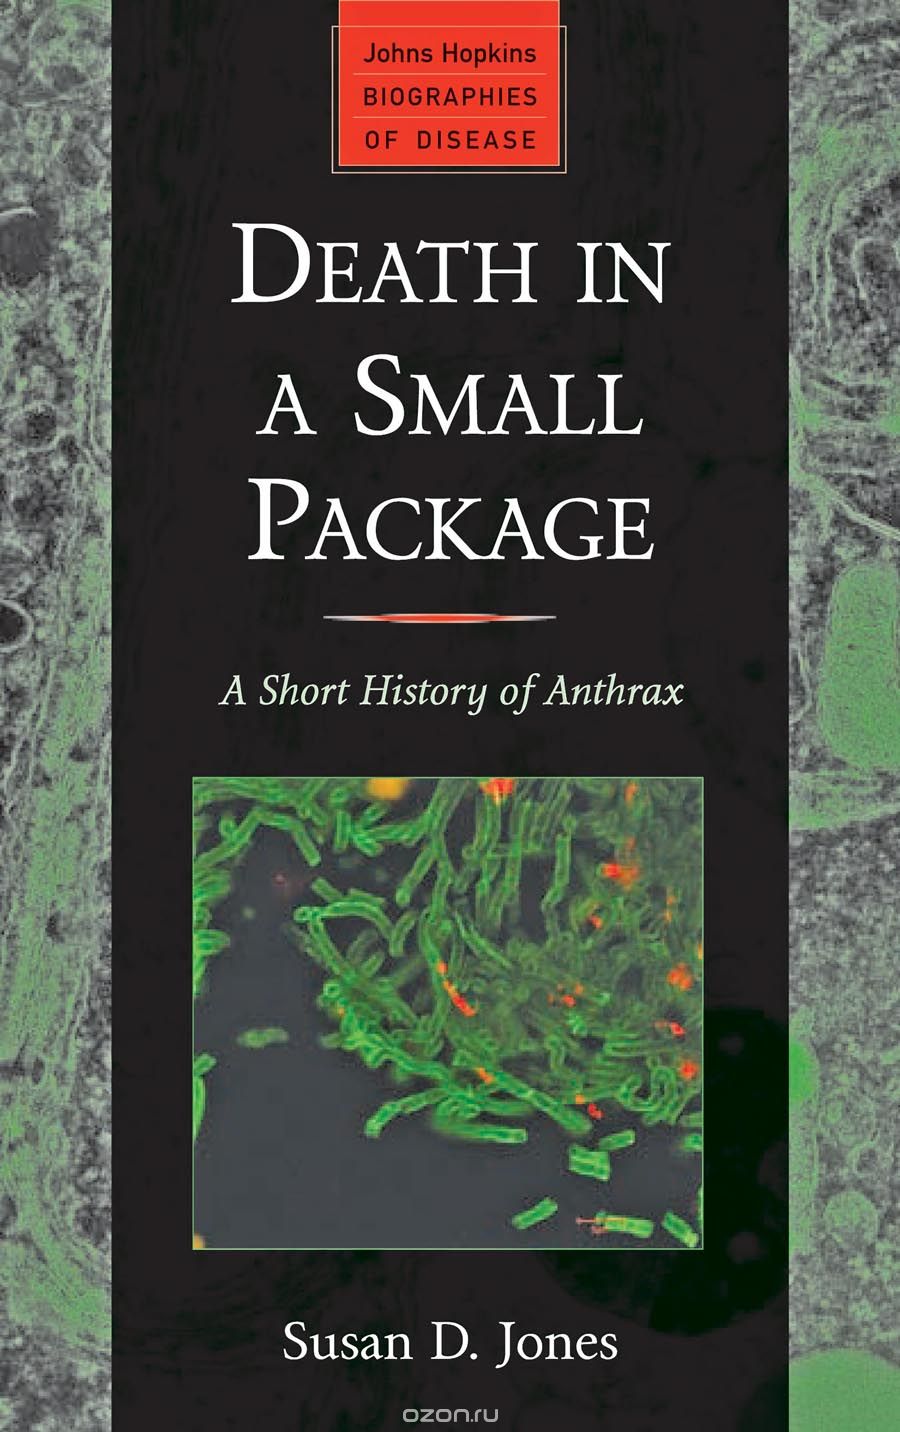 Death in a Small Package – A Short History of Anthrax